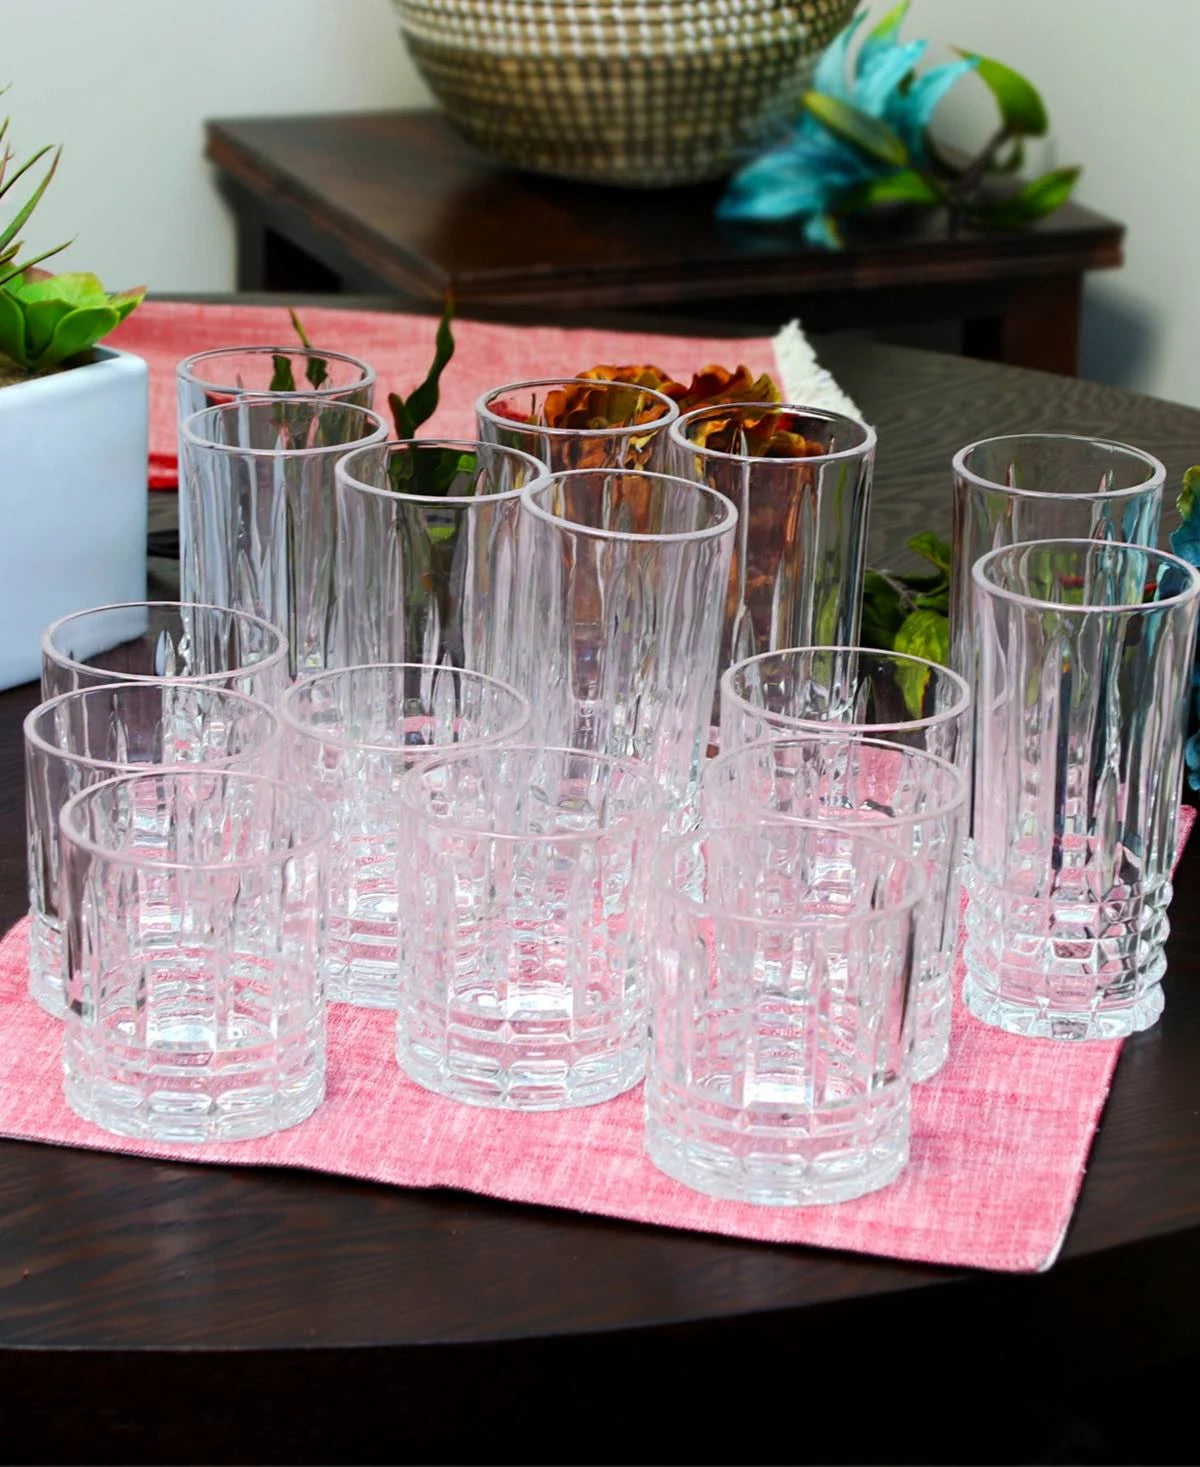 16 PC Jewelite Tumbler and Double Old Fashioned Glass Set